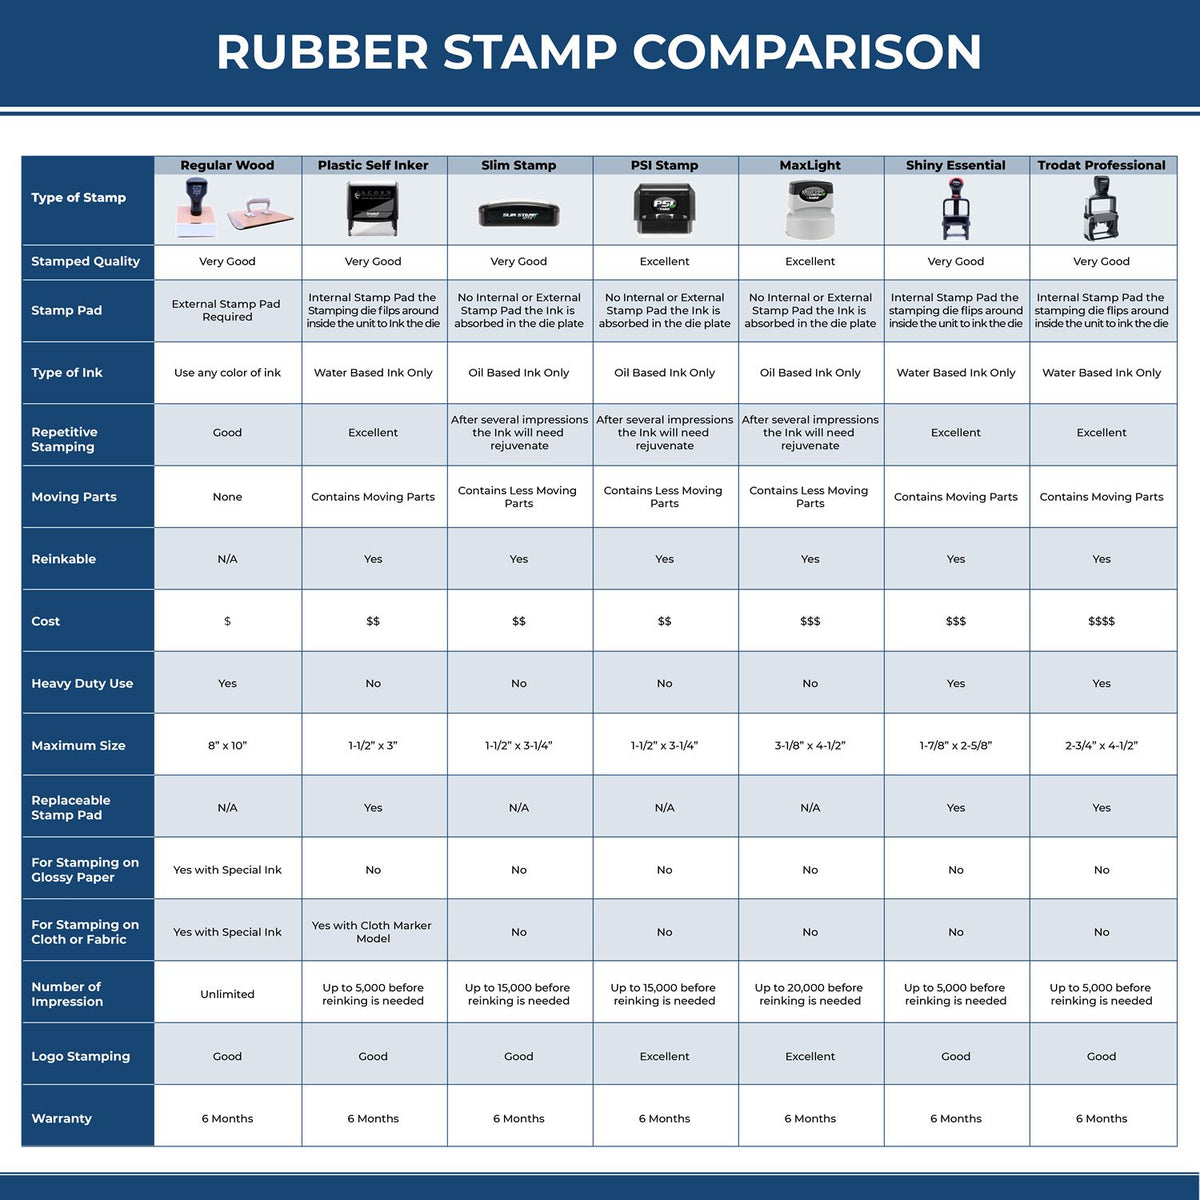 A comparison chart for the different types of mount models available for the Alaska Professional Engineer Seal Stamp.